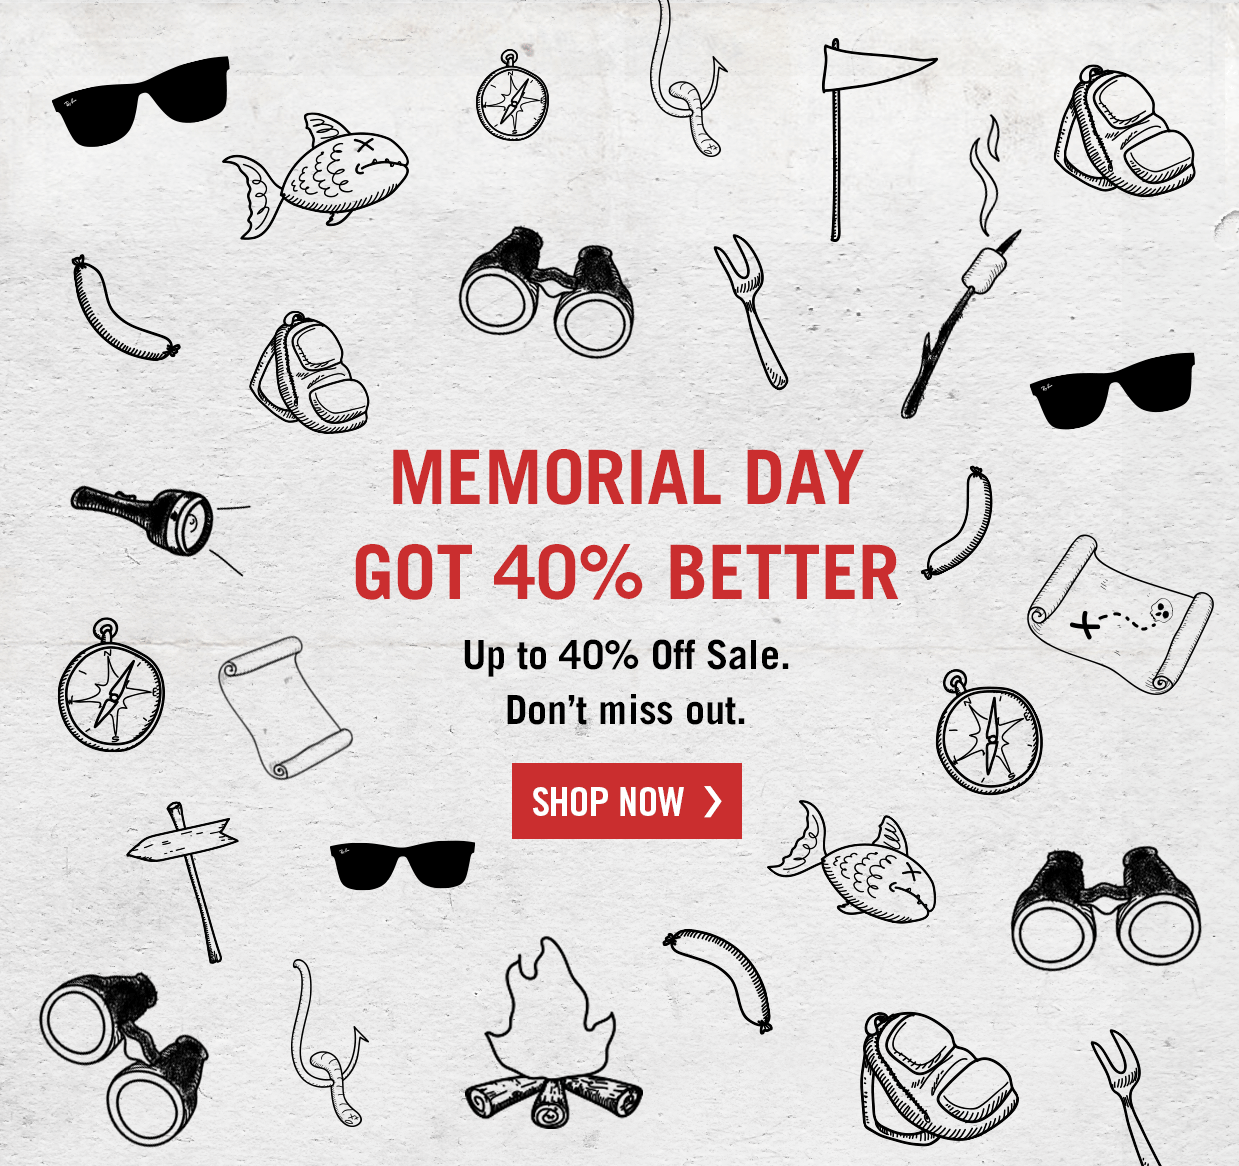 Ray-Ban: Hurry! Memorial Day sale is 